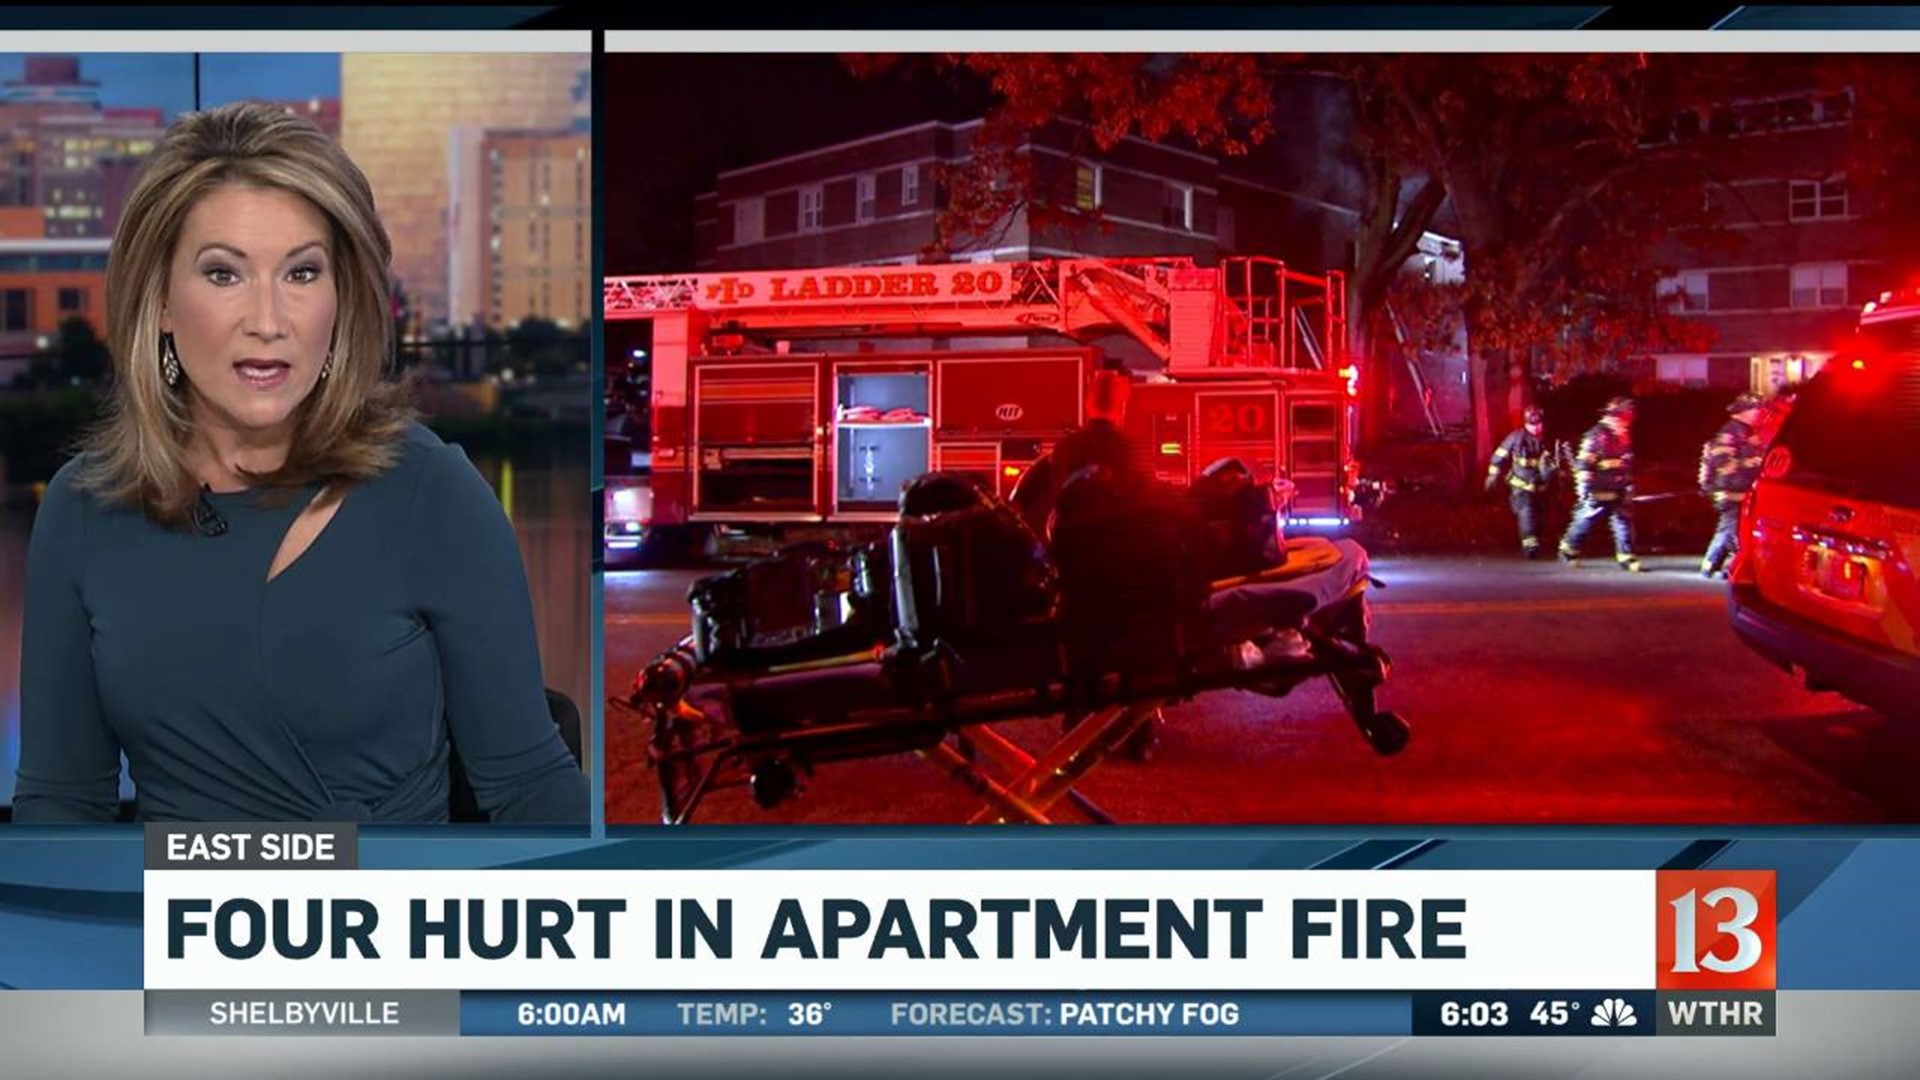 Four people hurt in apartment fire on East side